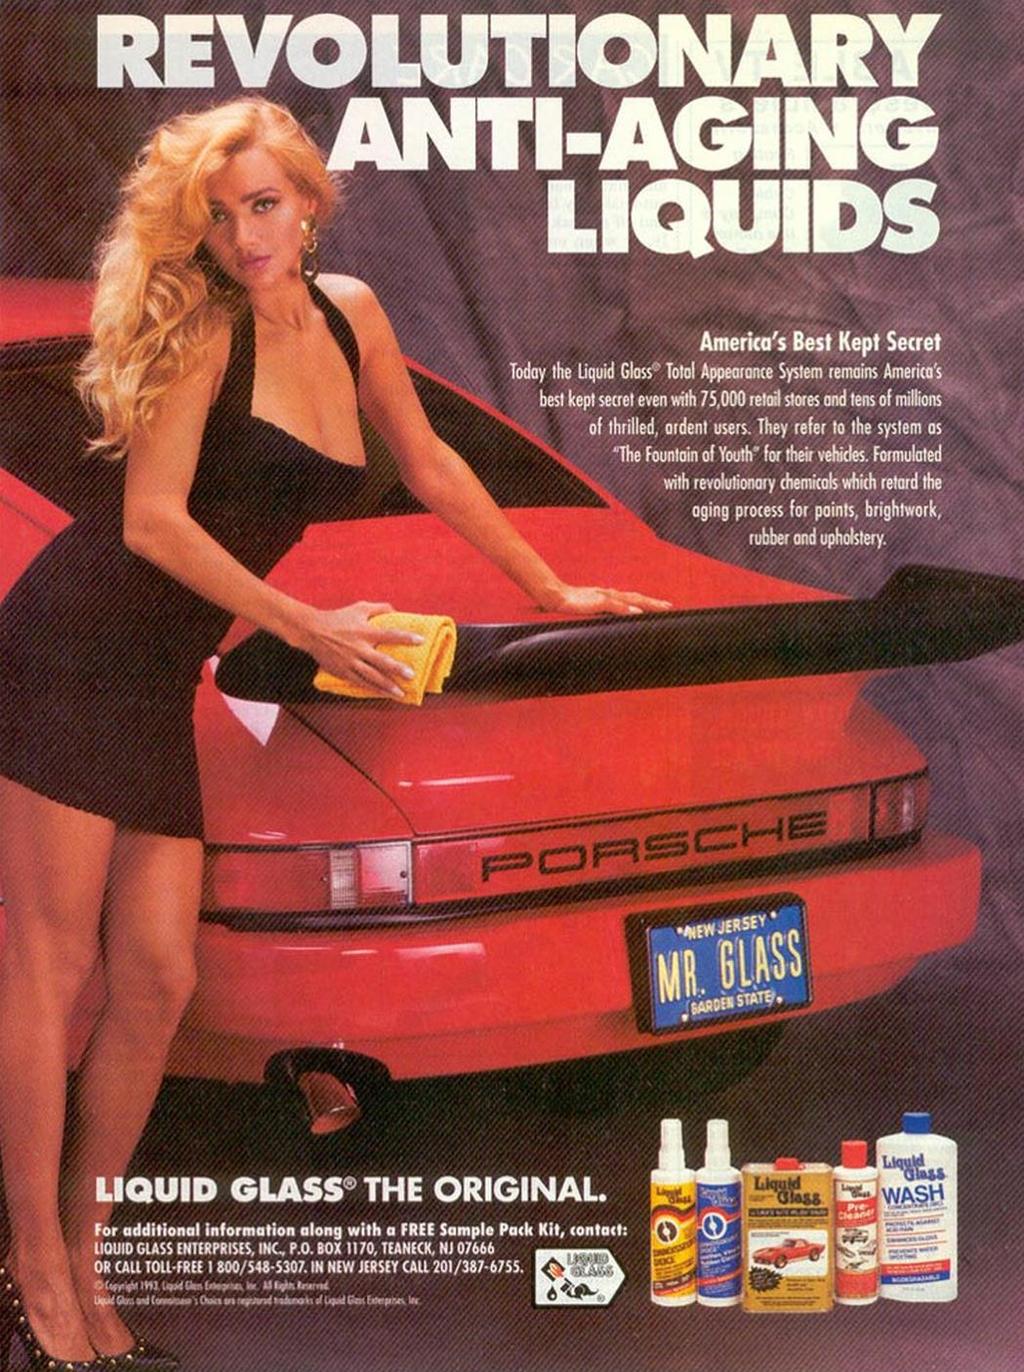 Liquid Glass Enterprises, Inc. v. Dr. Ing. h.c.f. Porsche AG (D.N.J. 1998) Is the PORSCHE mark and trade dress necessary to promotion of the Liquid Glass products?